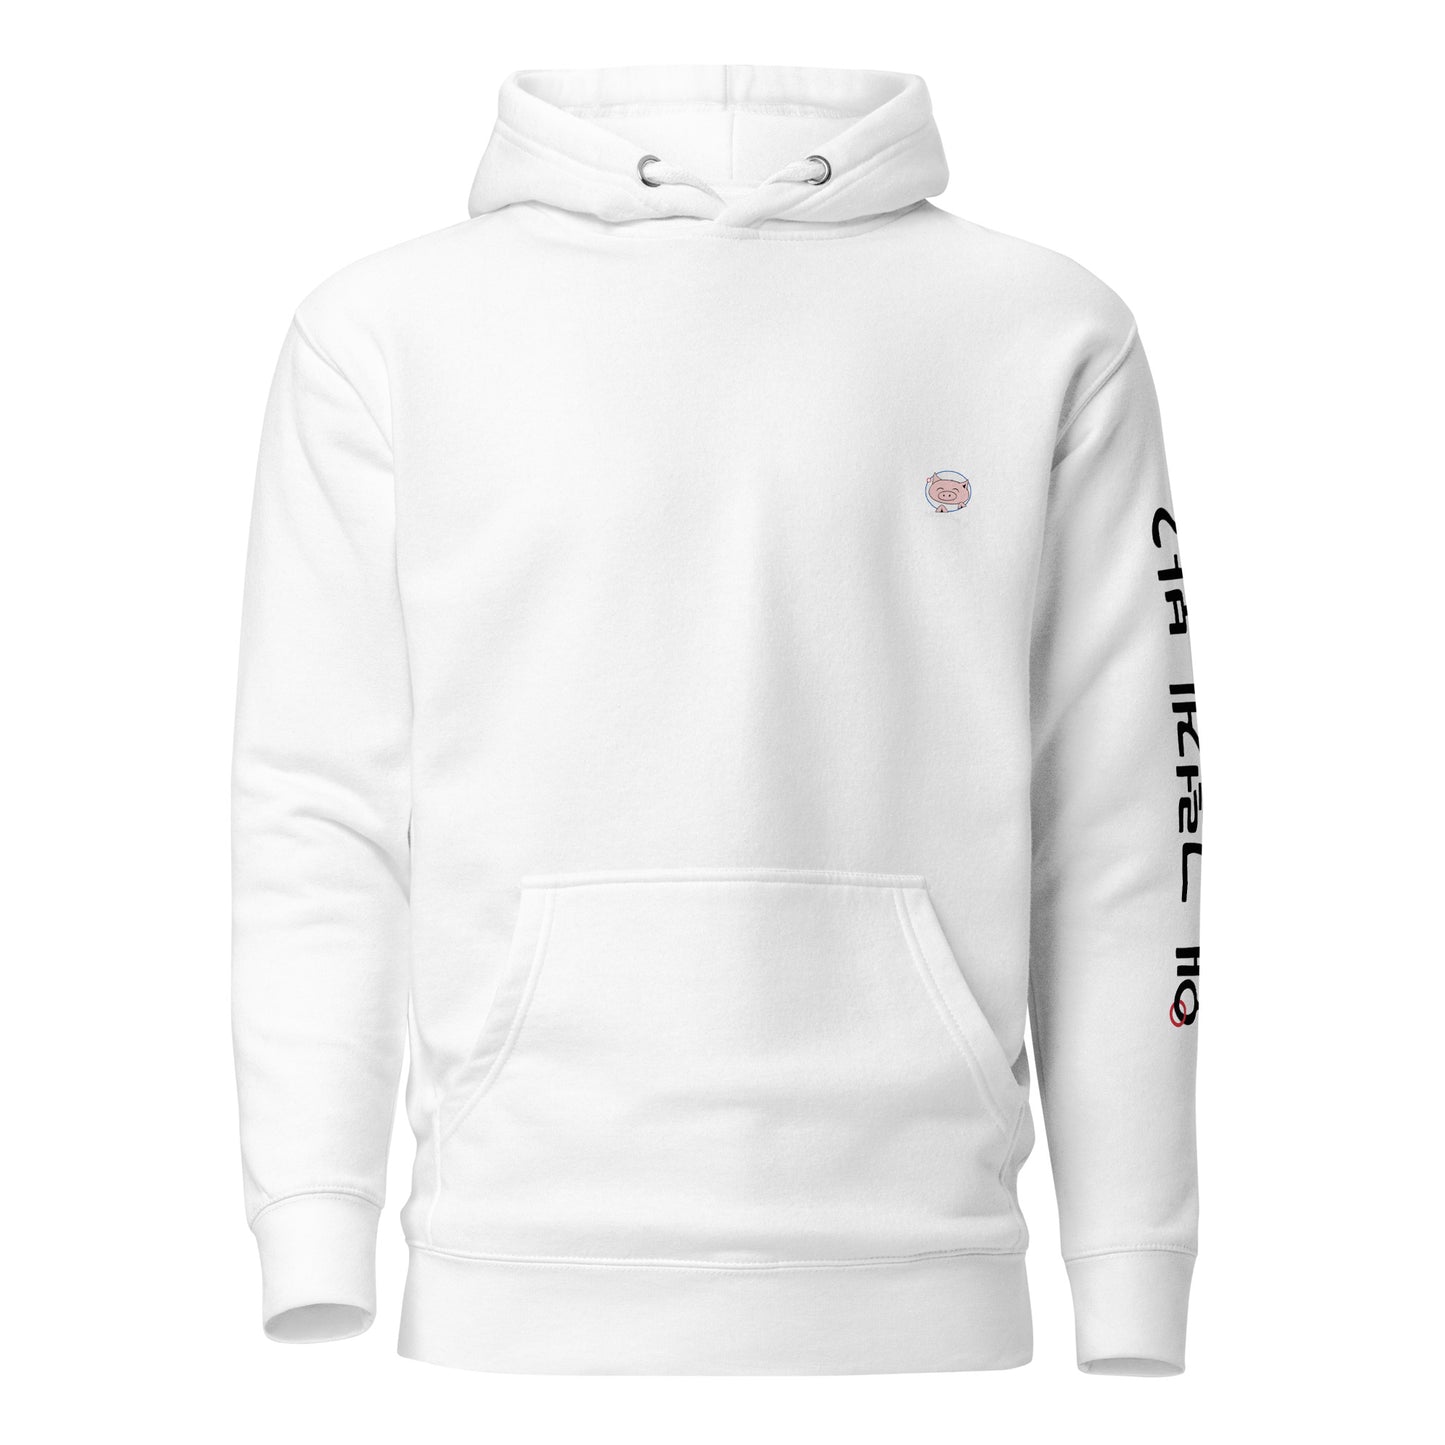 White hoodie with small Mwohae logo on the left chest